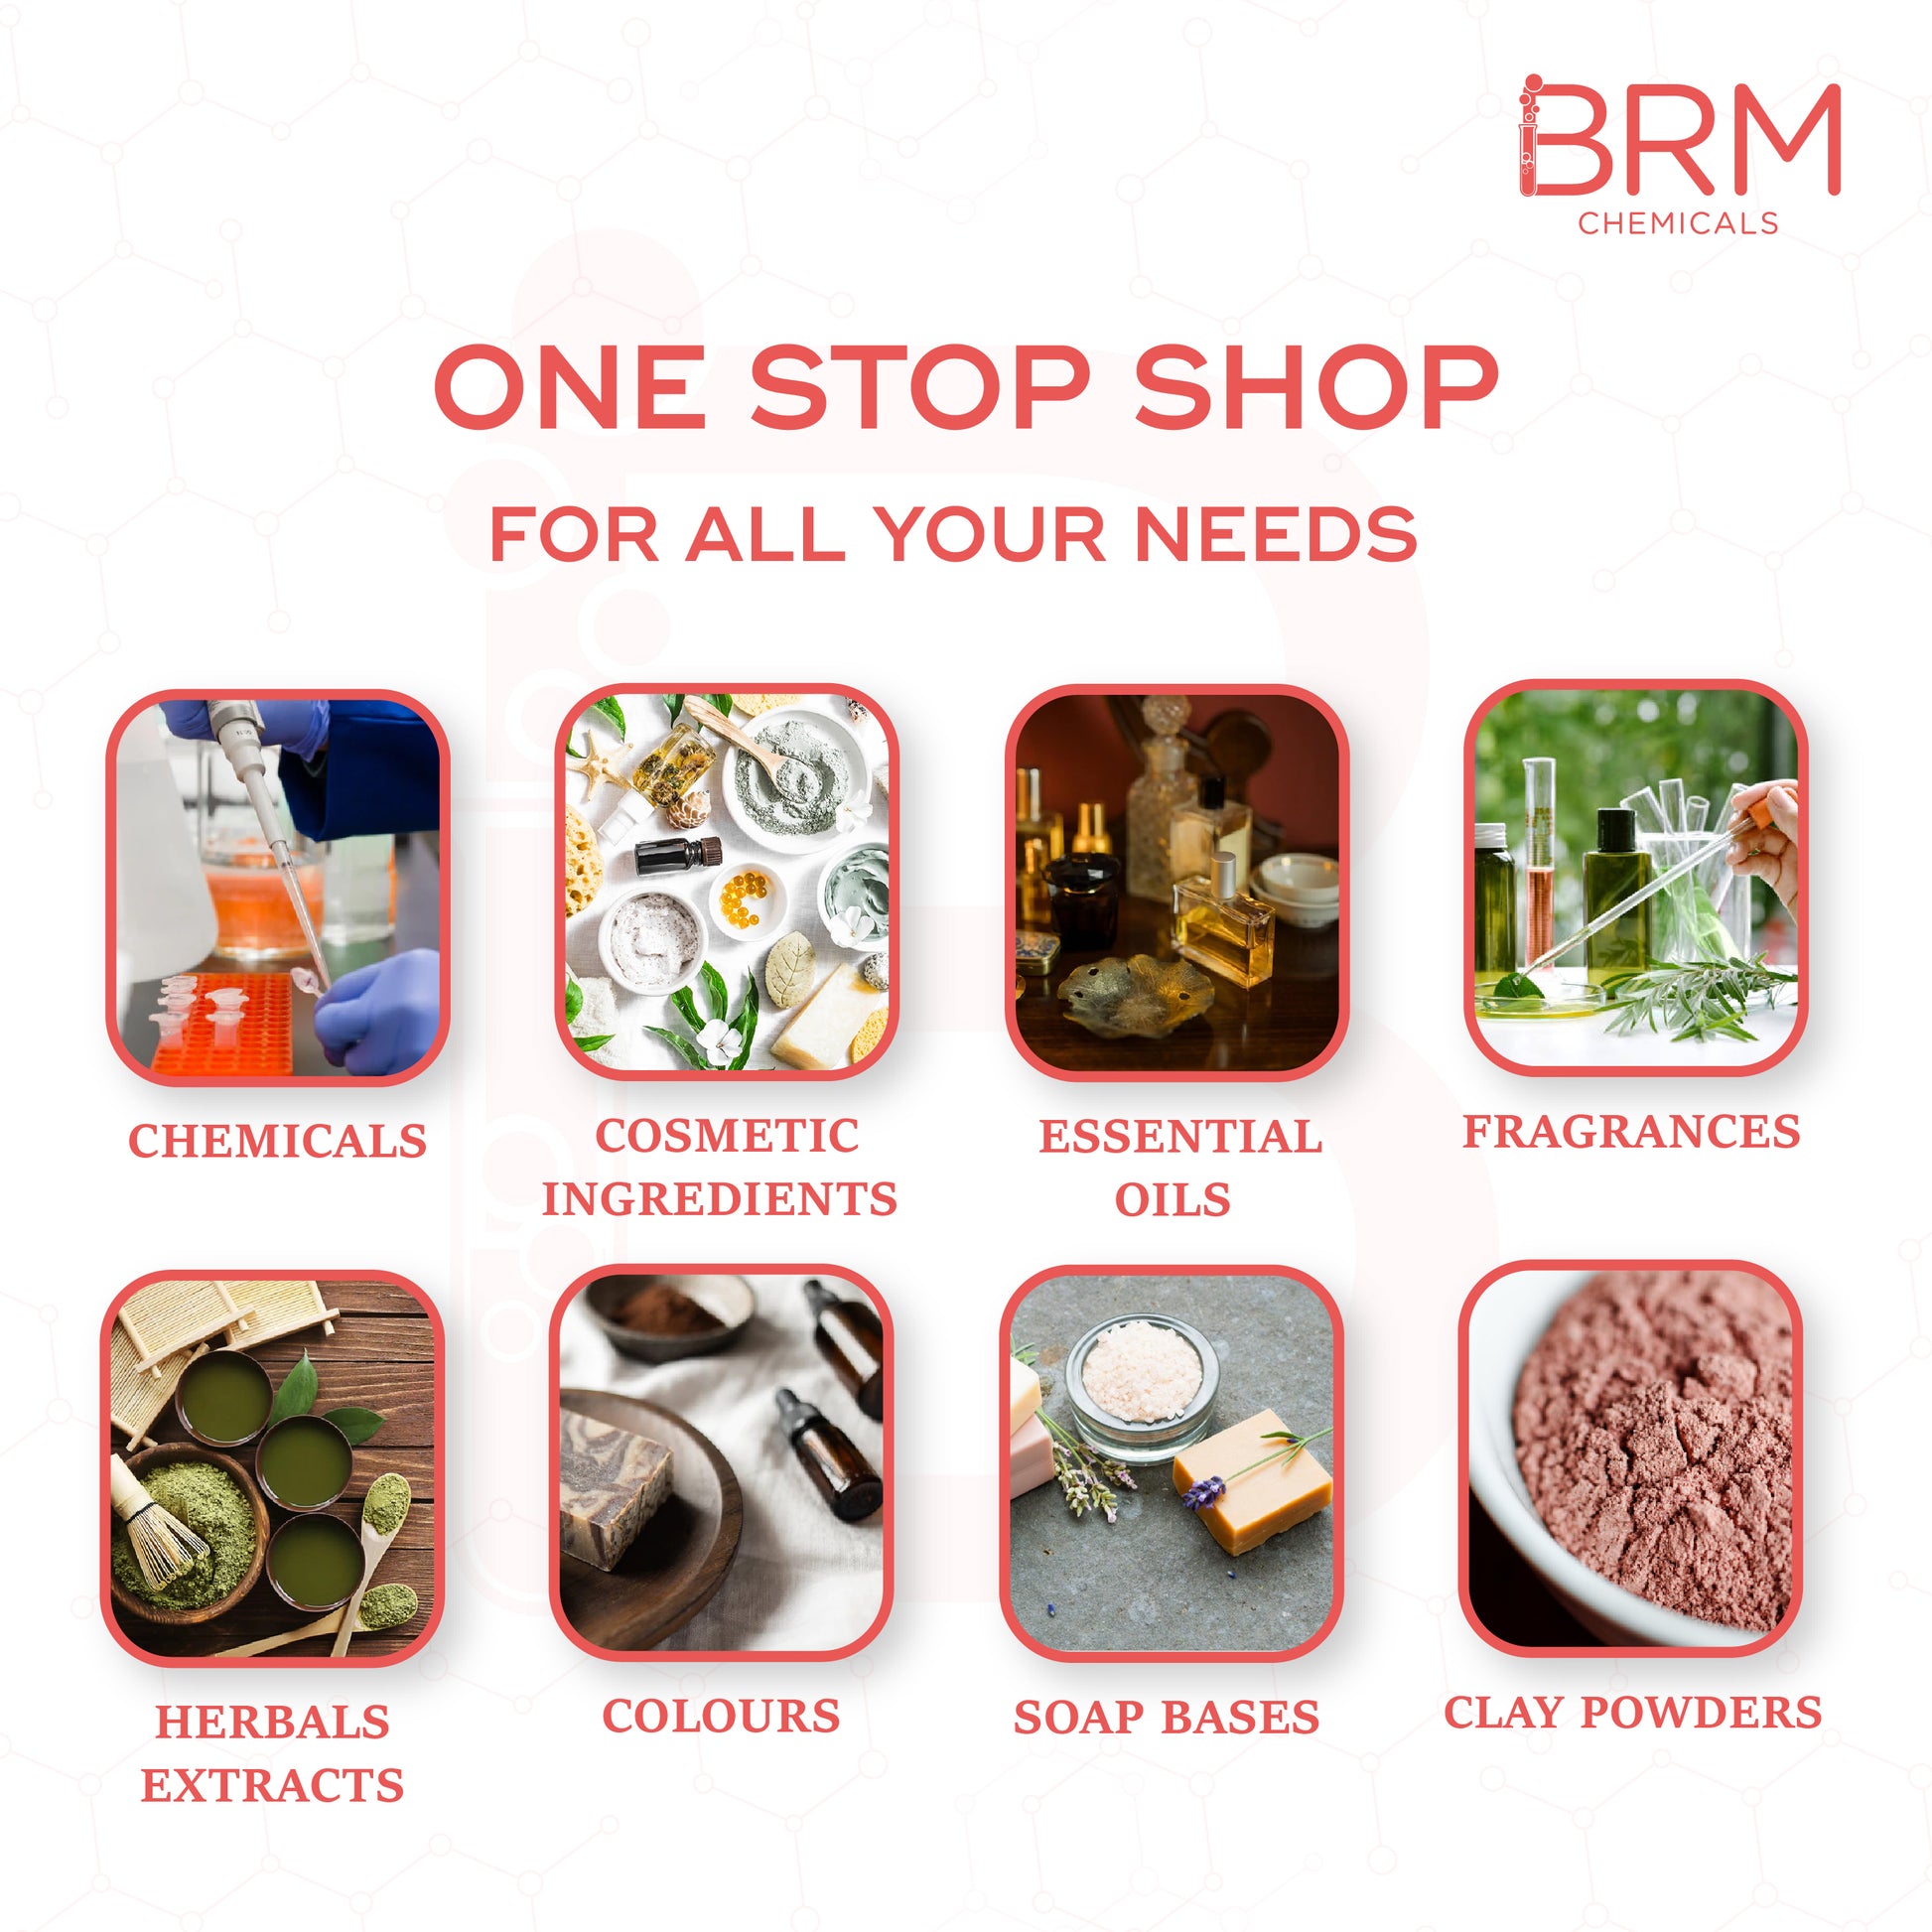 brm chemicals' poster for one stop store for chemicals, cosmetics ingredients, essential oils, fragrances, herbals extracts, colours, sopa bases, clay powders